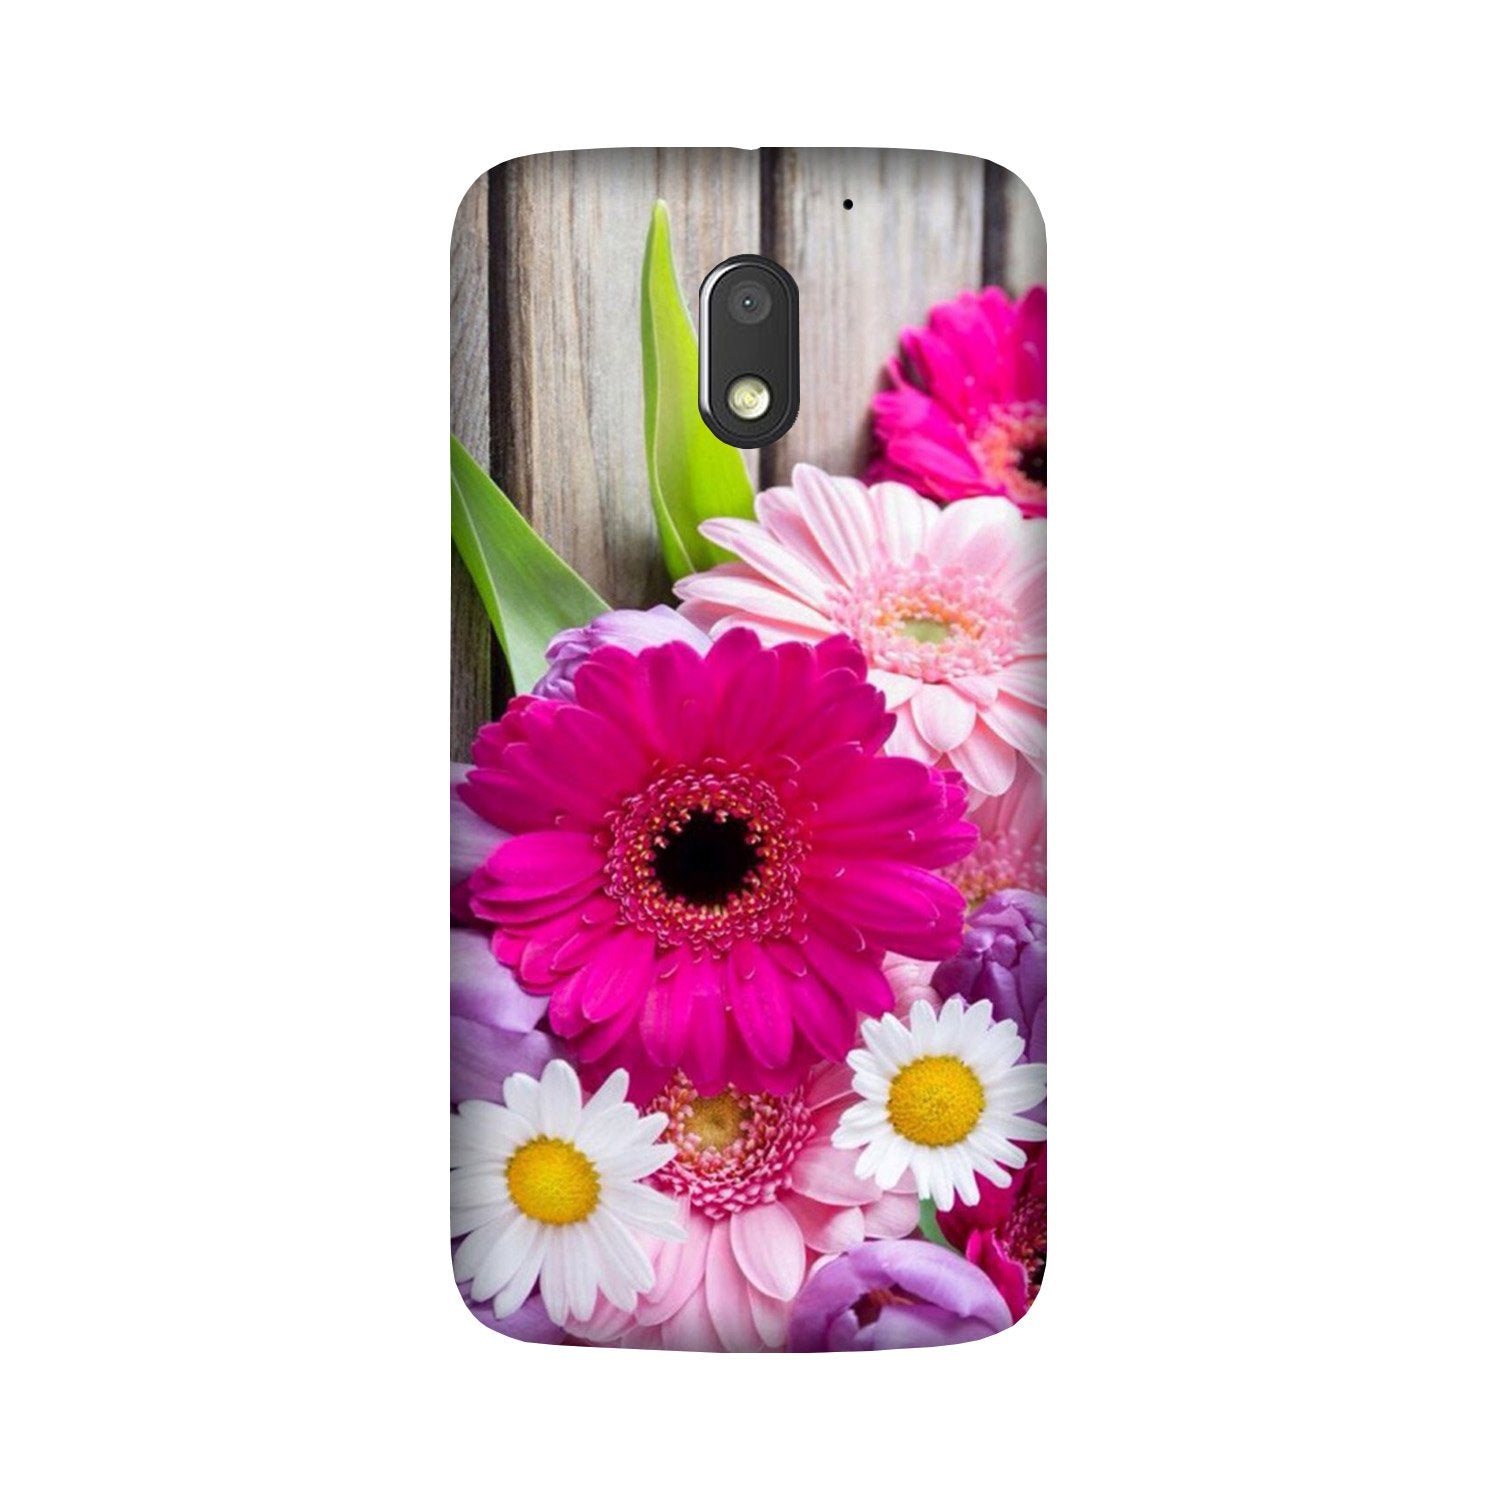 Coloful Daisy2 Case for Moto G4 Play